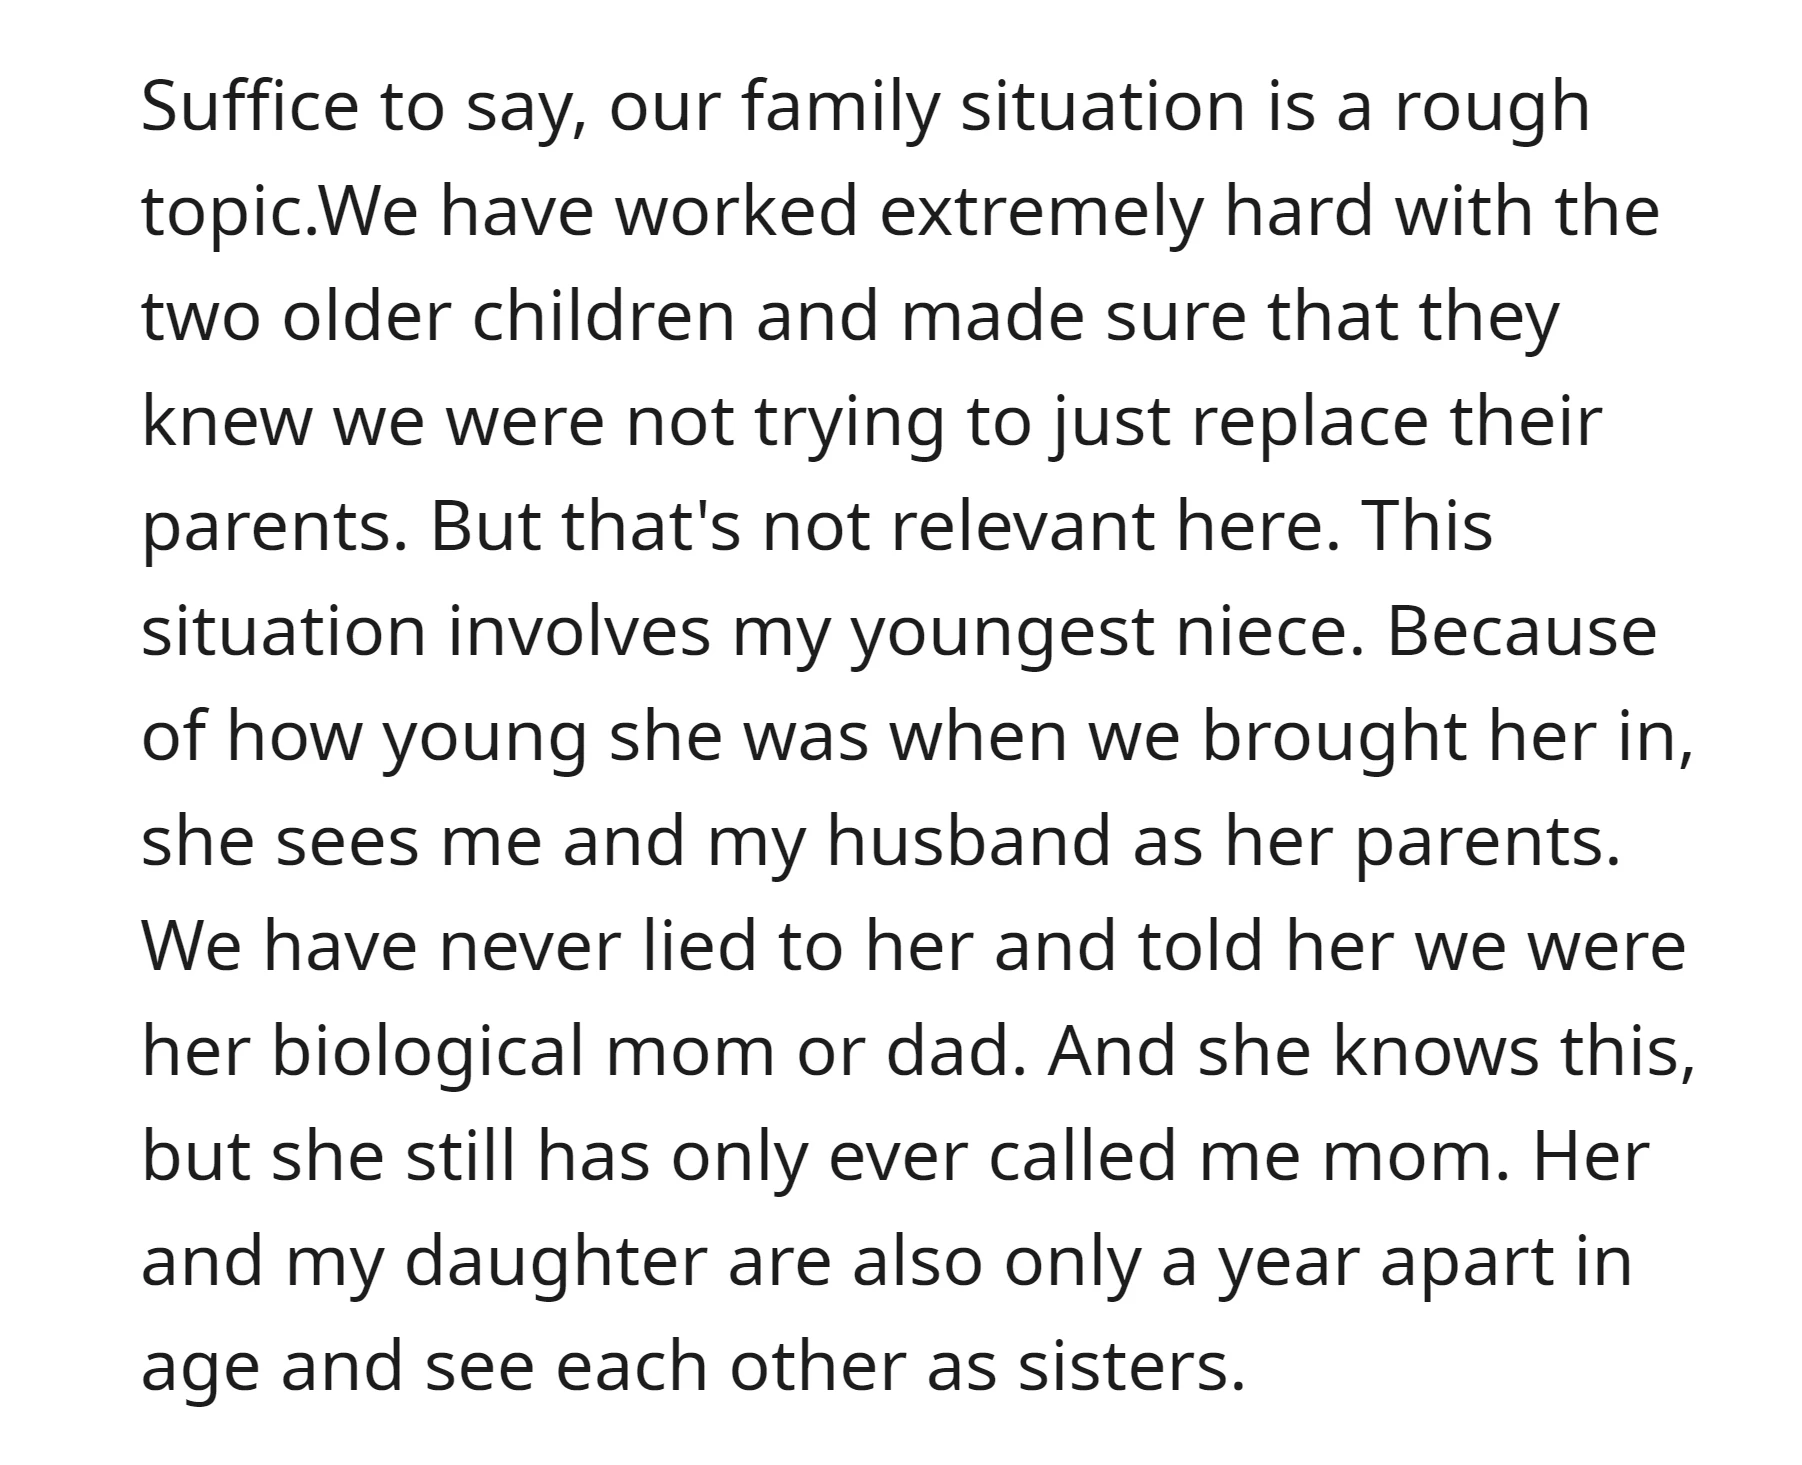 OP and her husband have worked hard to foster a healthy relationship with their adopted niece